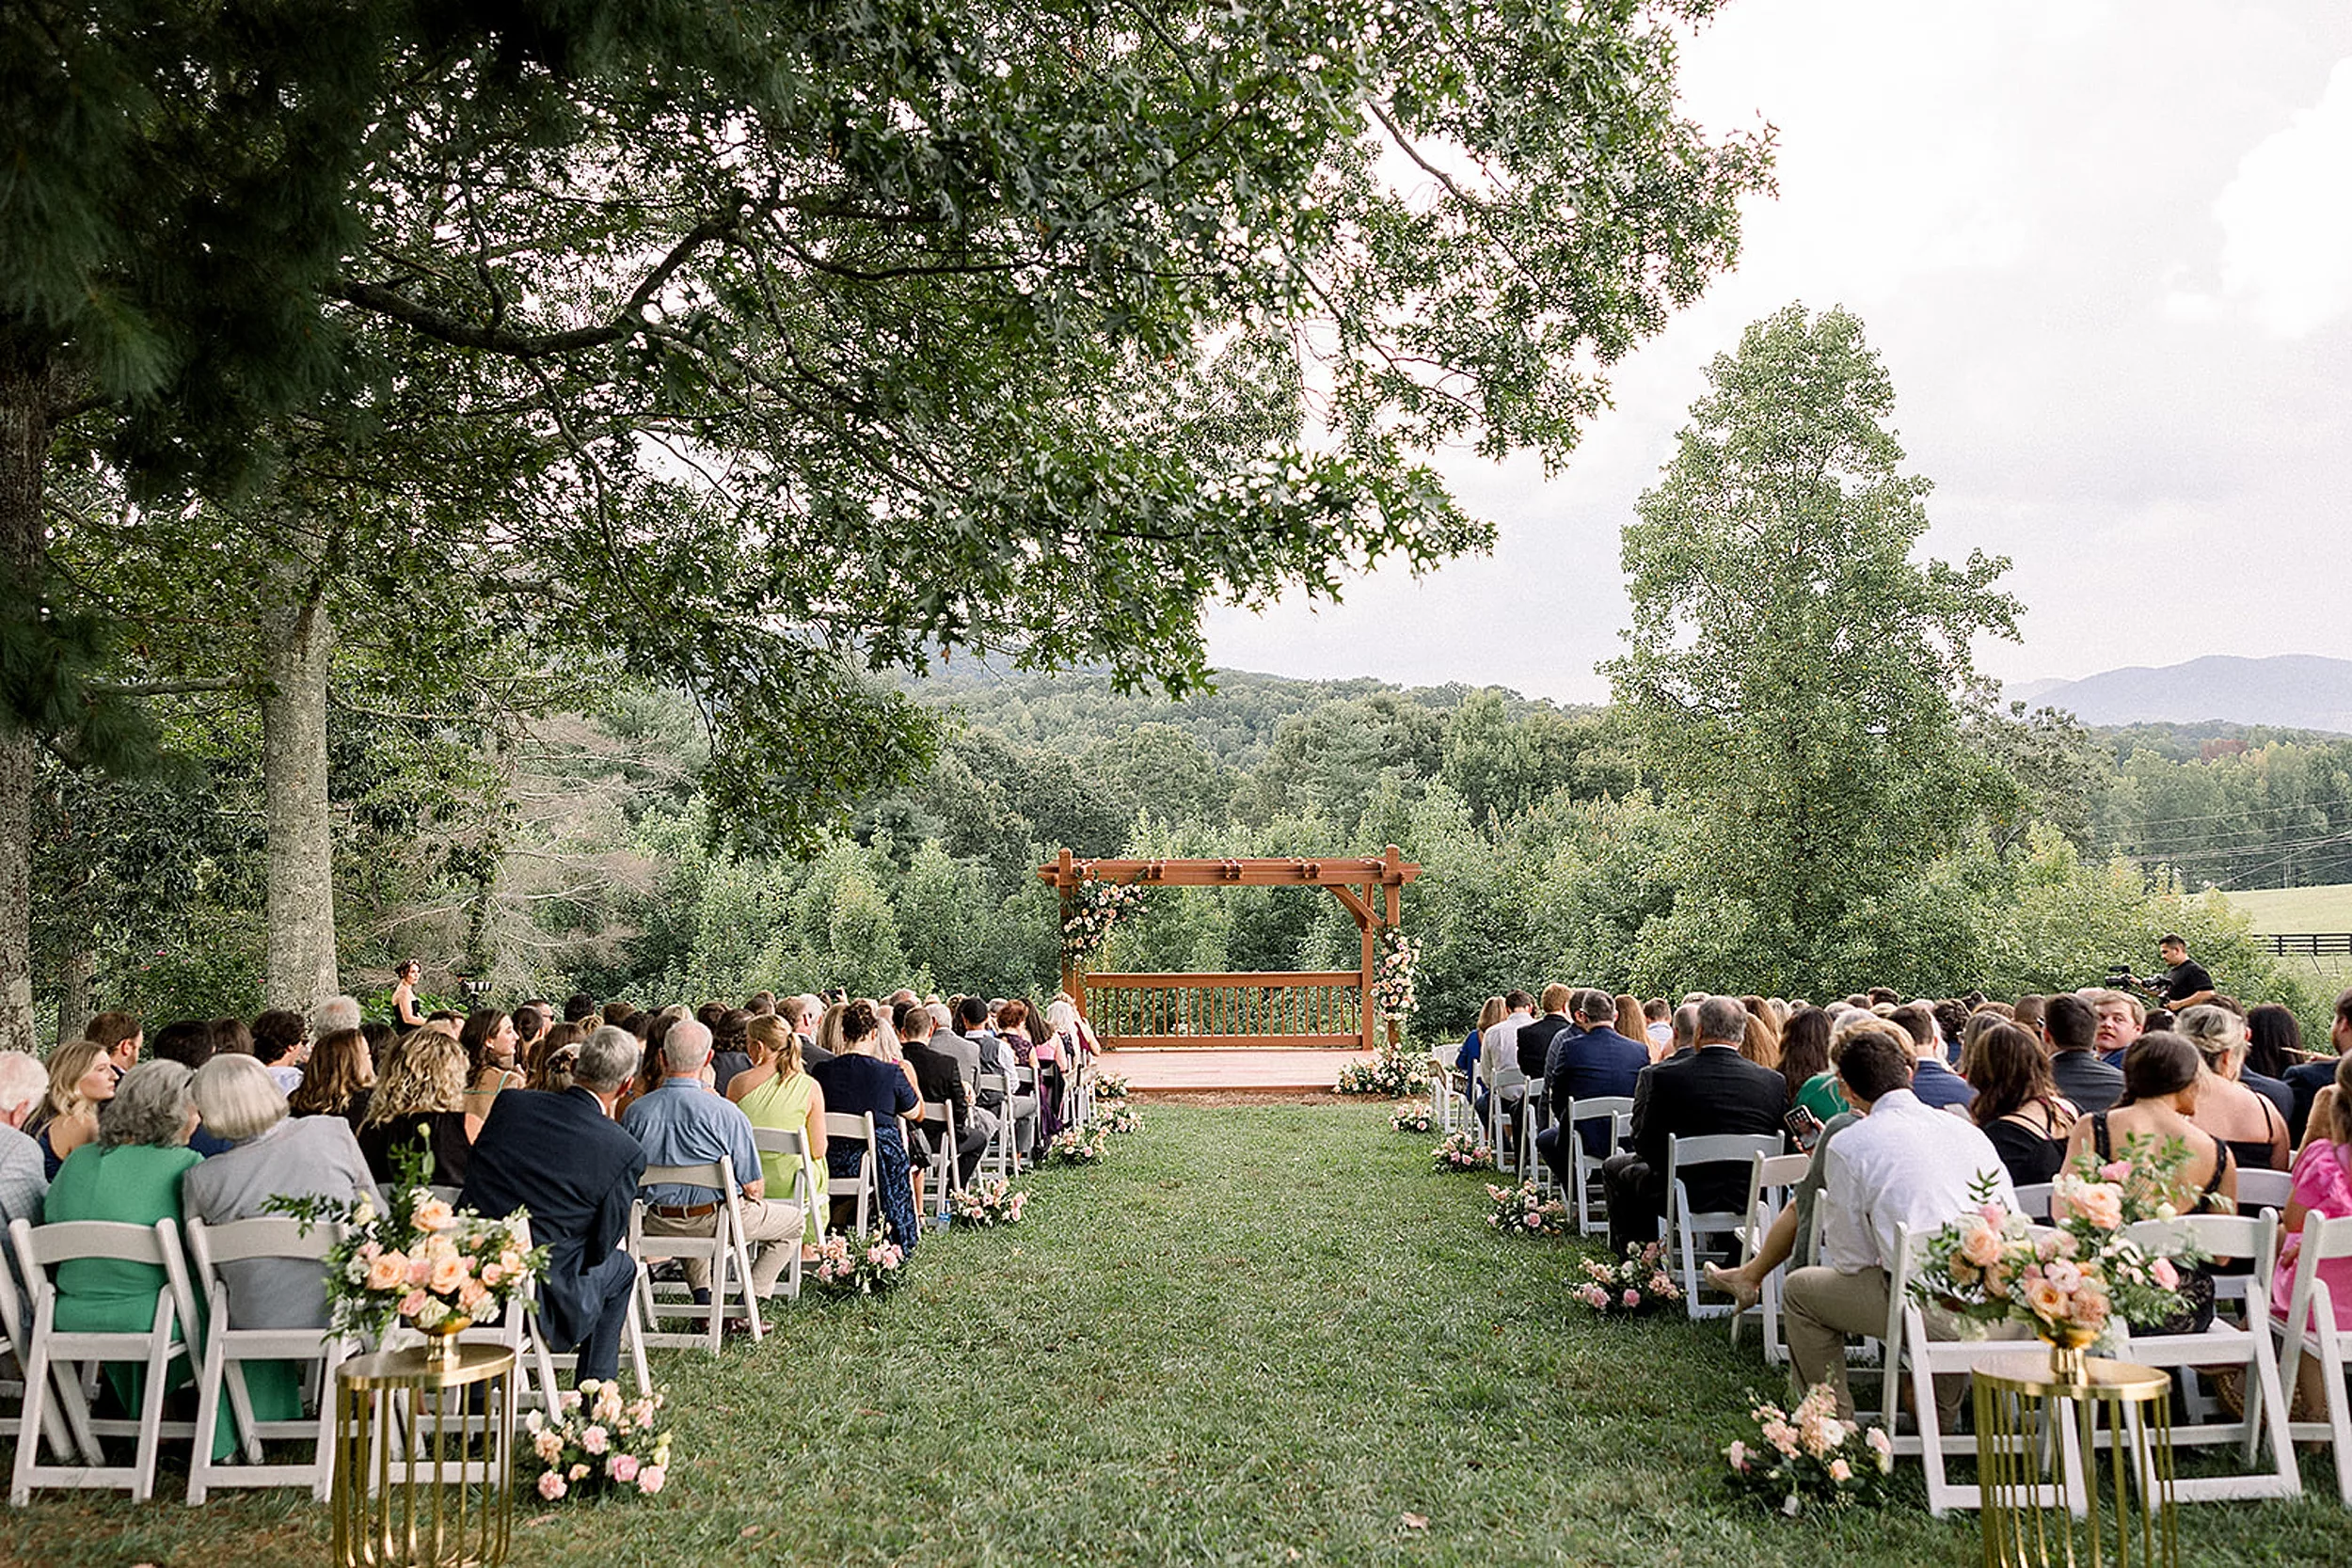 Guests sit in white chairs waiting for an outdoor White Oaks Vineyard wedding on a hill